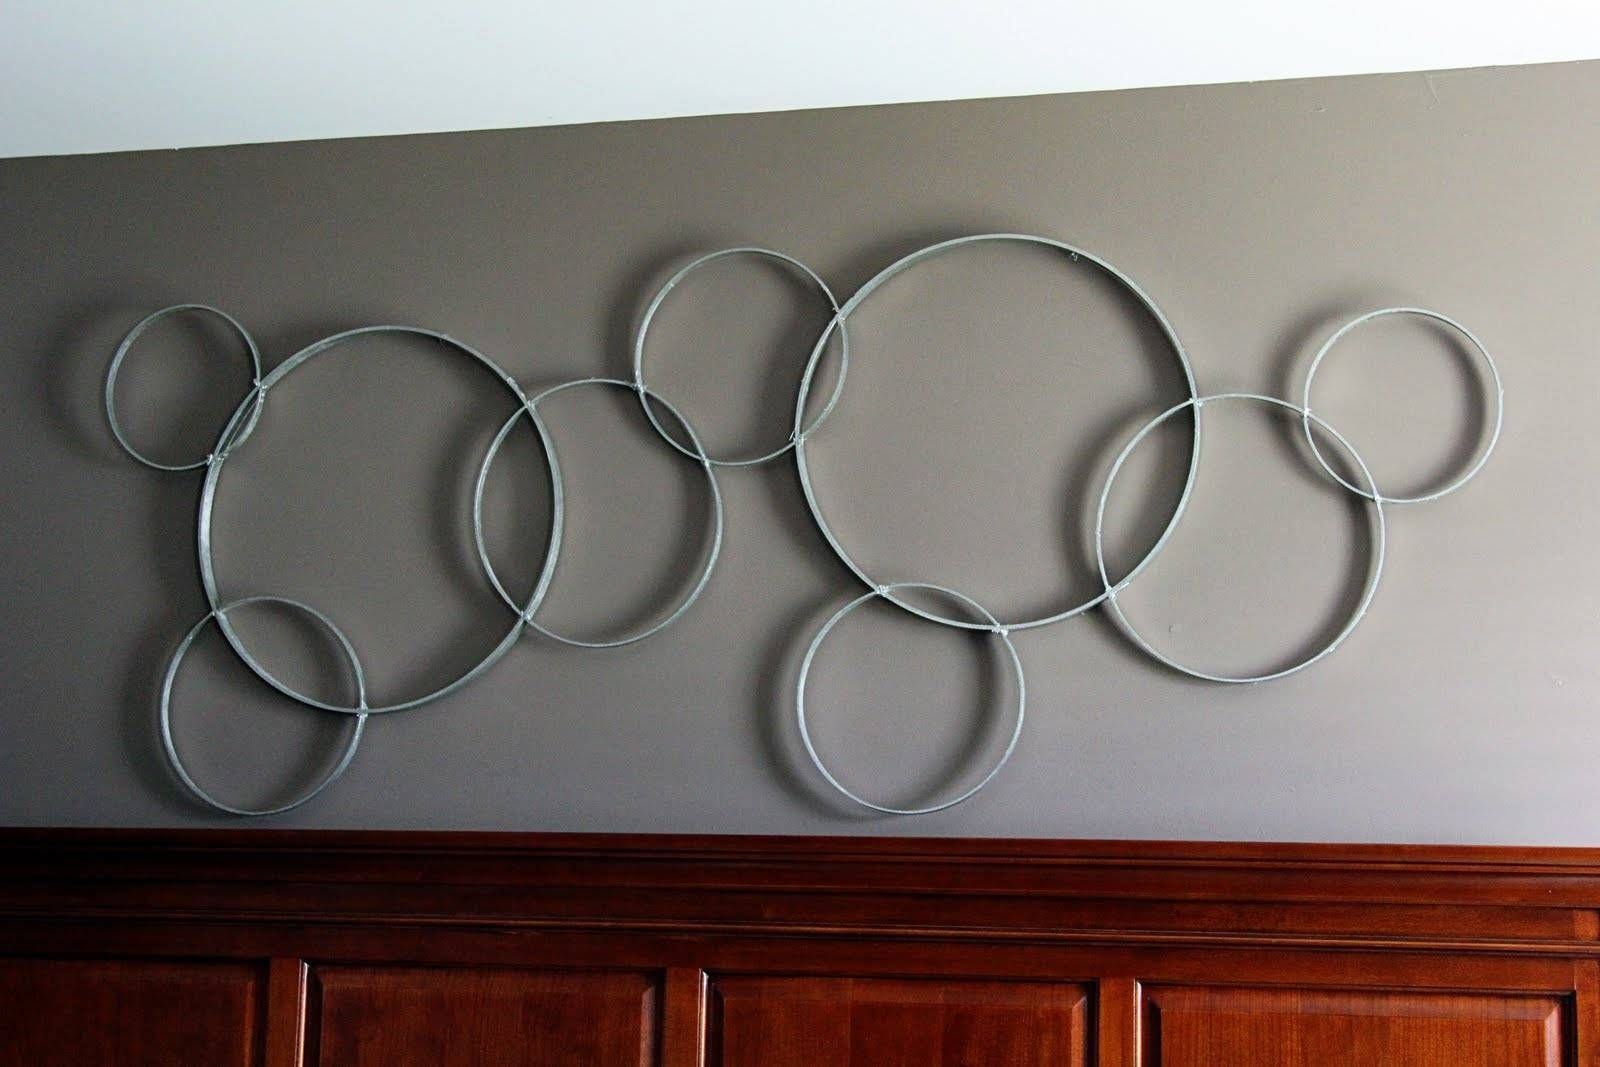 Amusing 30+ Circle Wall Art Design Ideas Of Intricate Circle Metal Inside Most Current Circles 3d Wall Art (View 20 of 20)